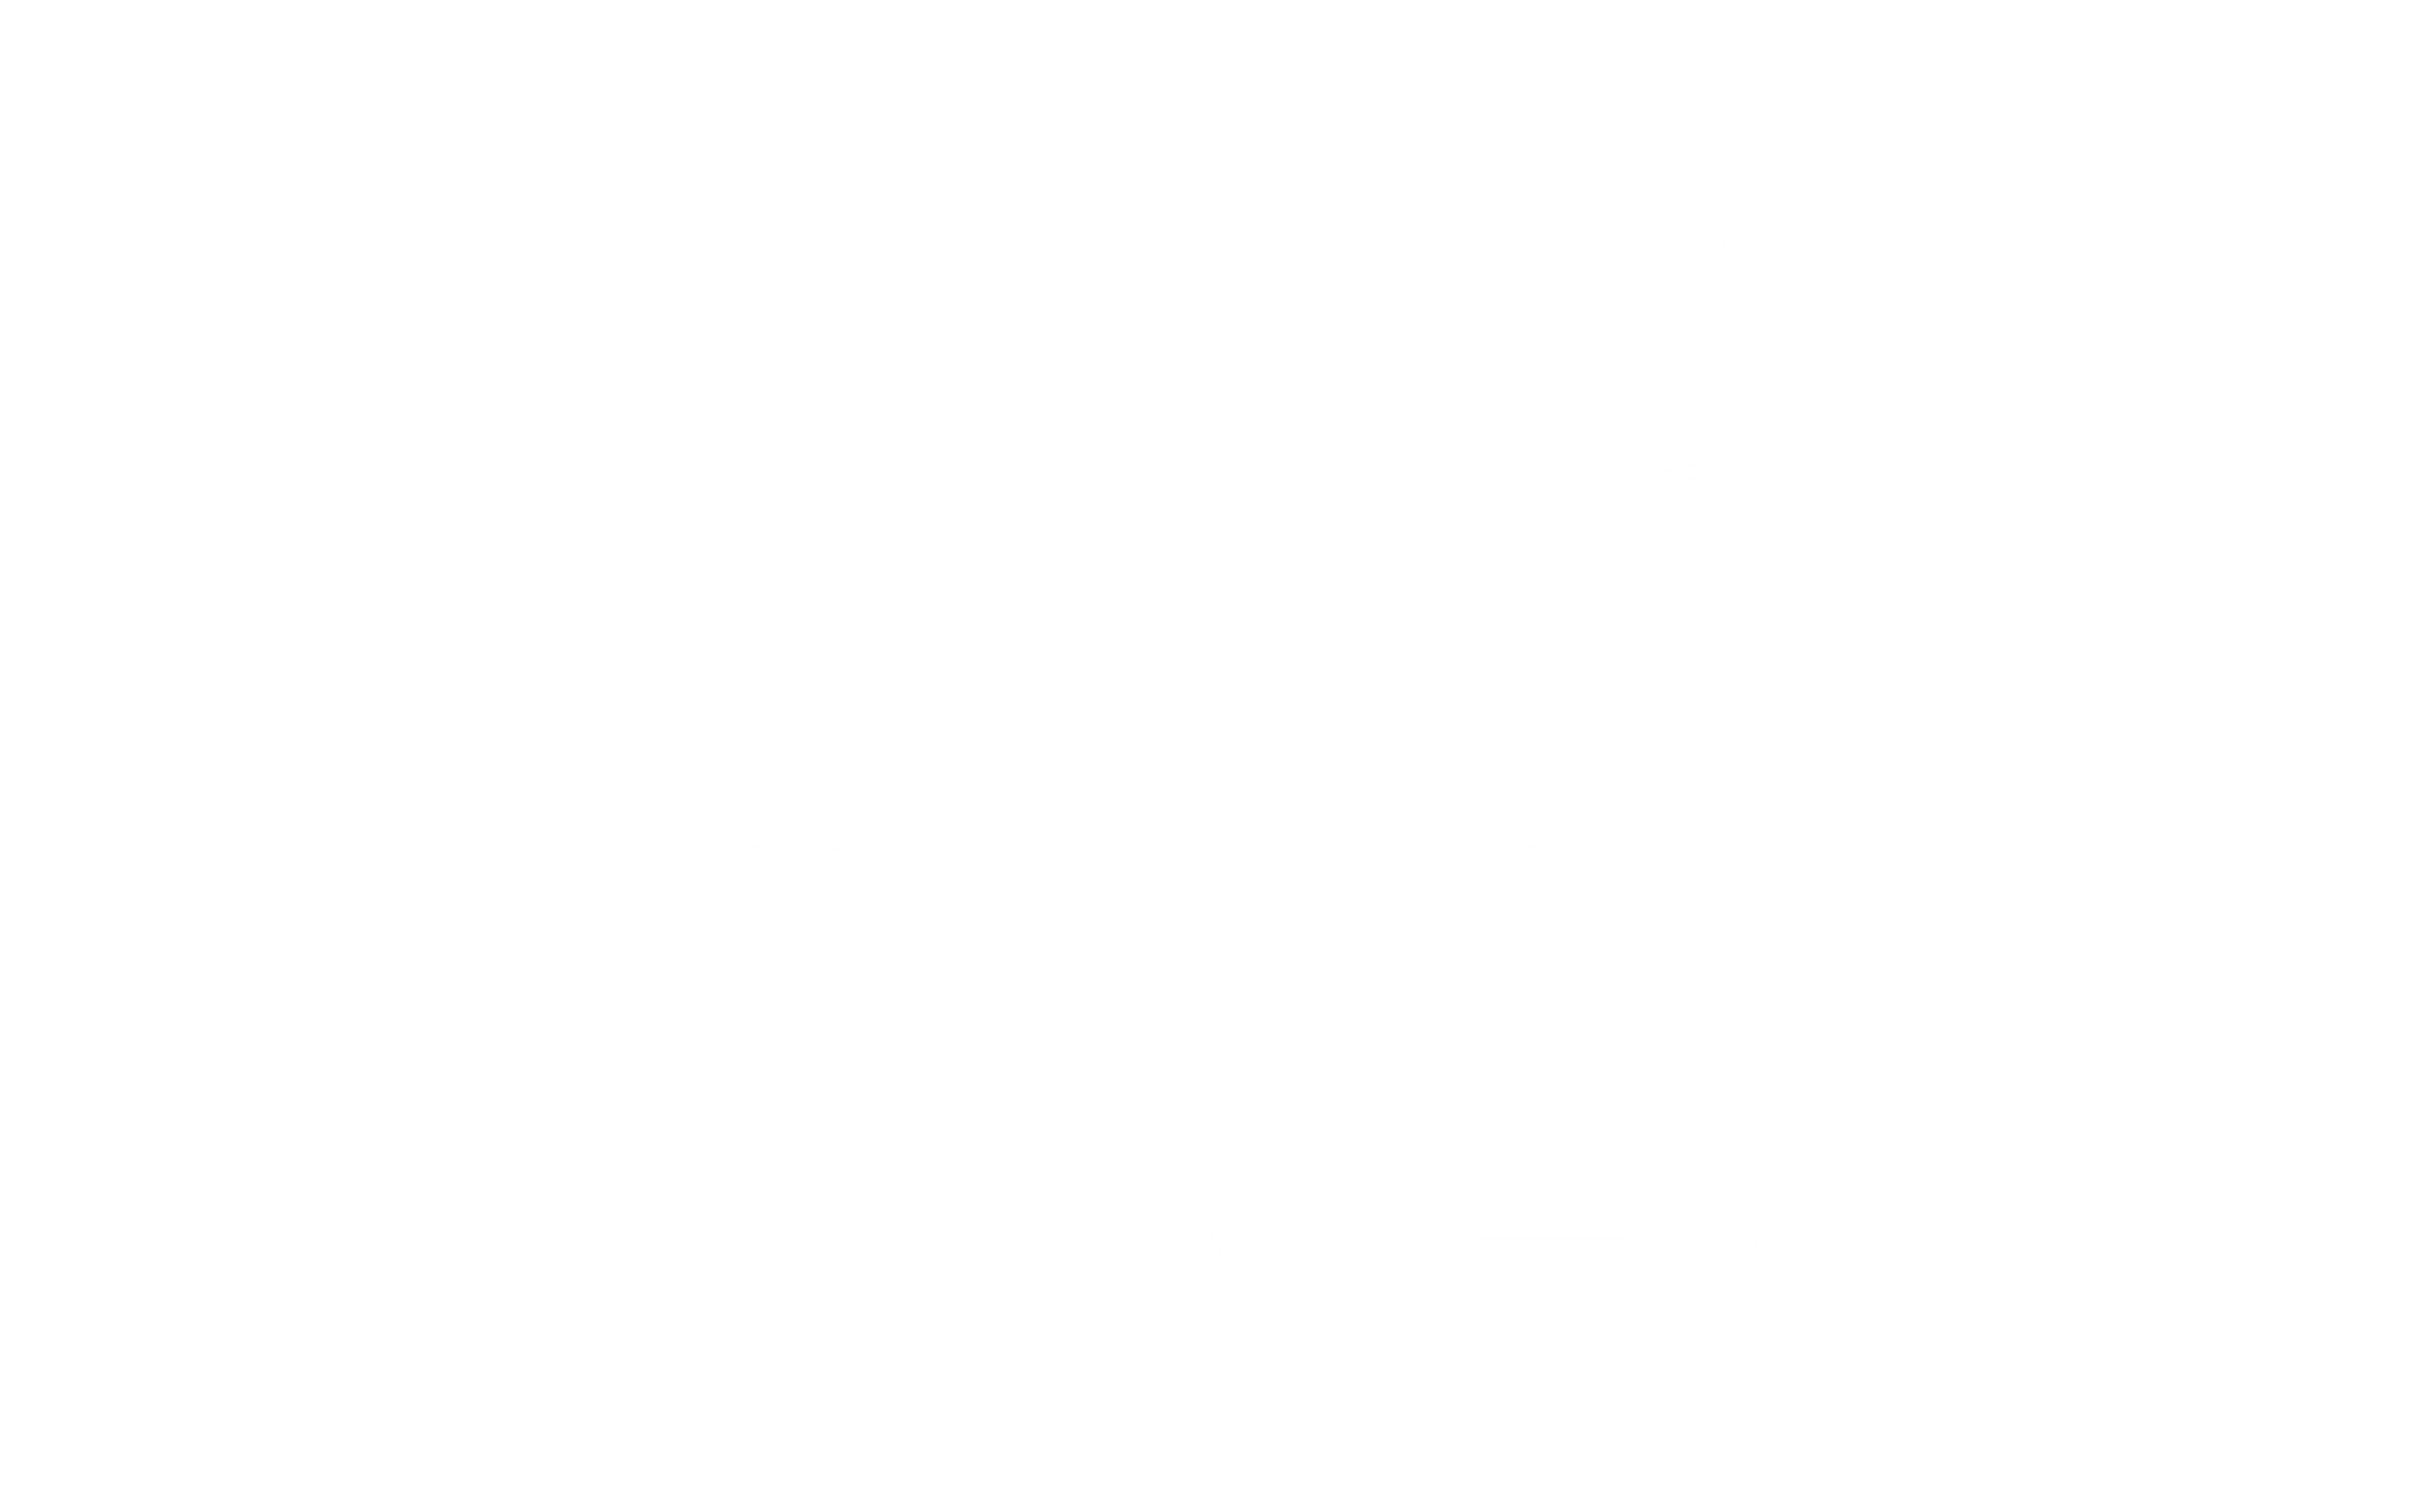 JB Synapse a top IT Solutions provider. It empowers businesses through secure, scabale, and innovative technology solutions.